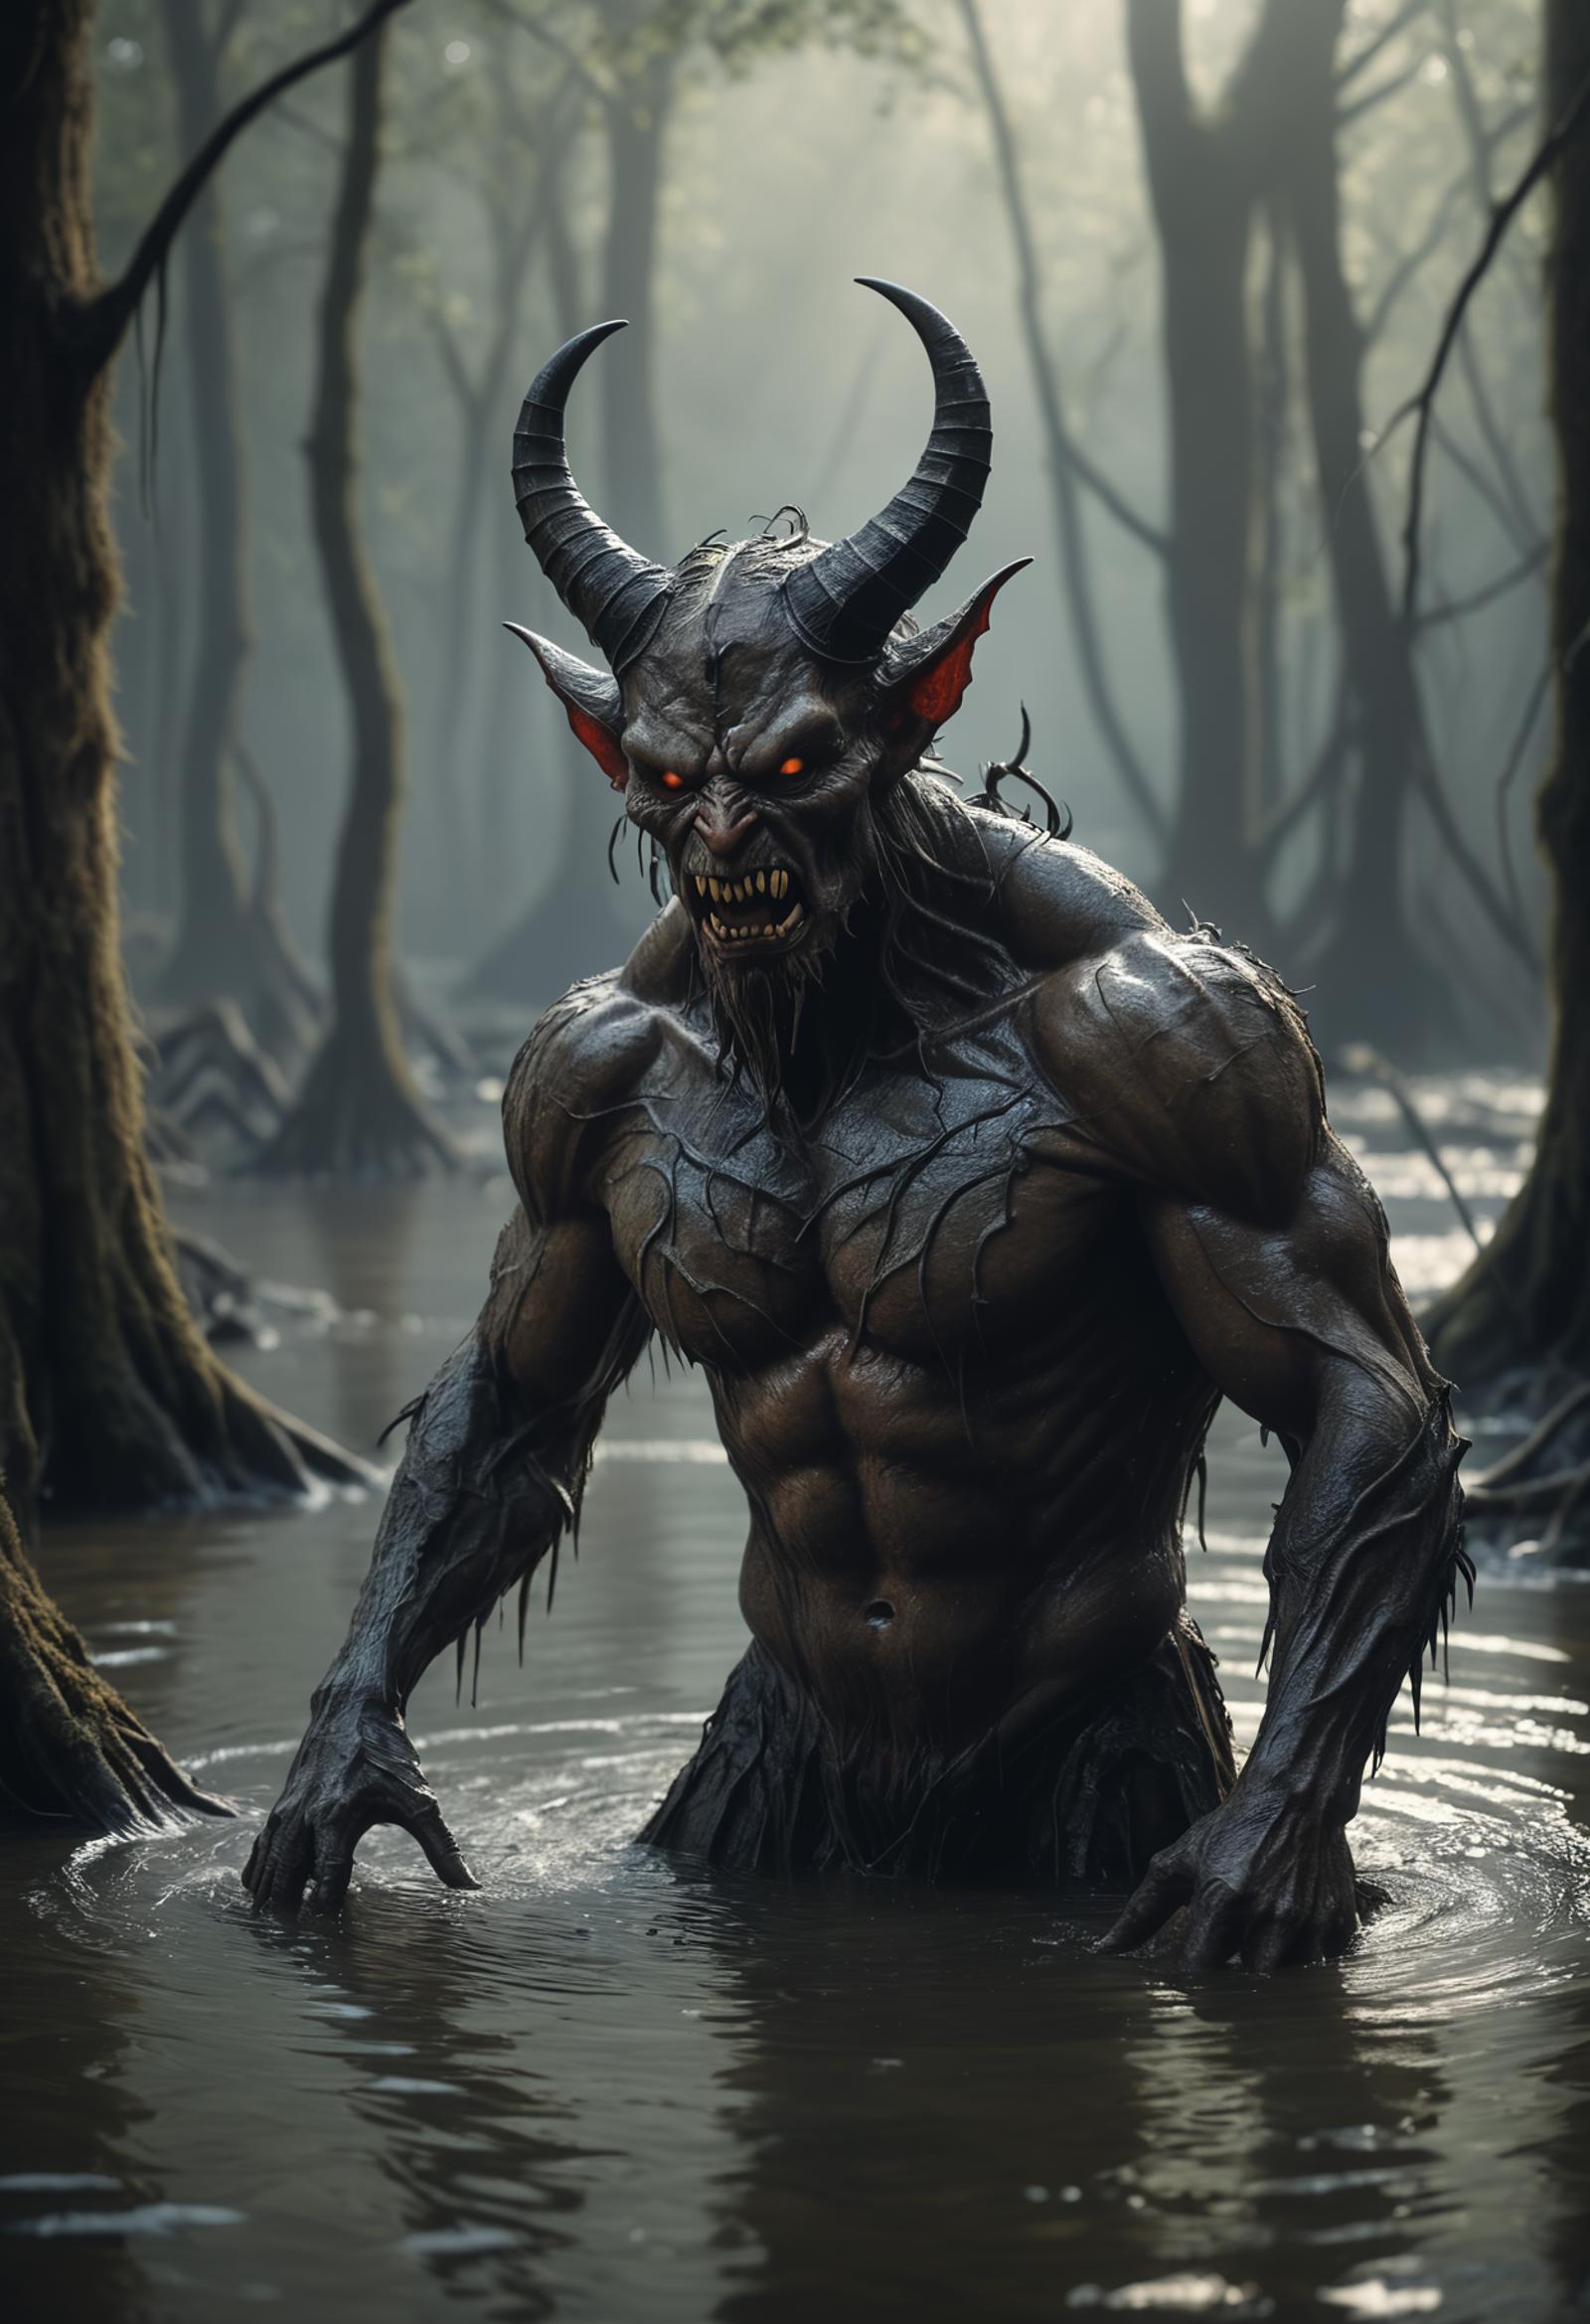 Man with horns and fangs standing in a river.